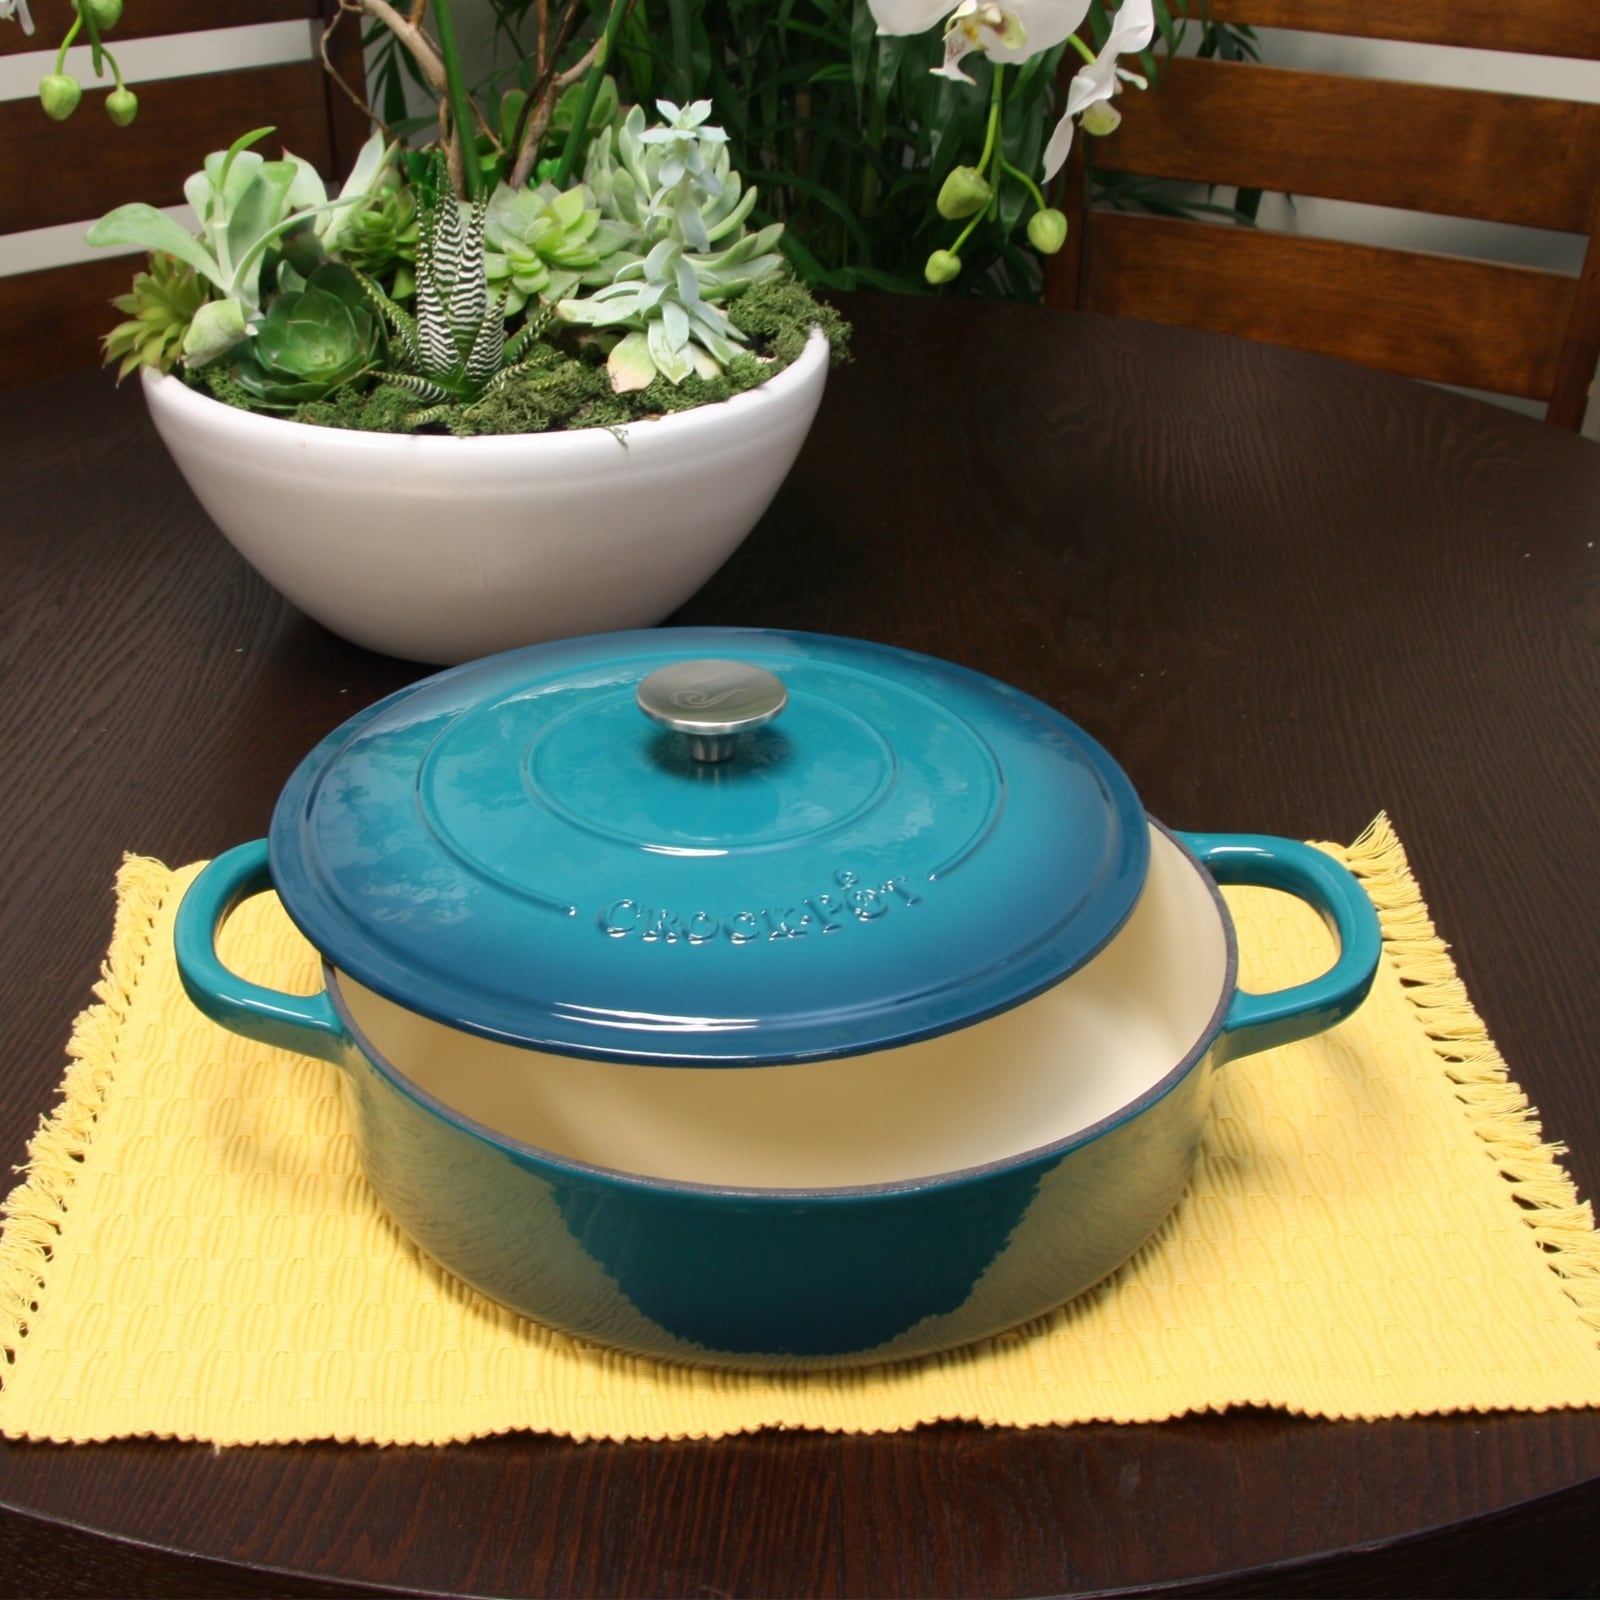 https://ak1.ostkcdn.com/images/products/is/images/direct/5ebadef6dfda82782ff53a7b0fb65a6875aba29f/5-Quart-Round-Enameled-Cast-Iron-Braising-Pan-W-Lid-in-Turquoise-Ombre.jpg